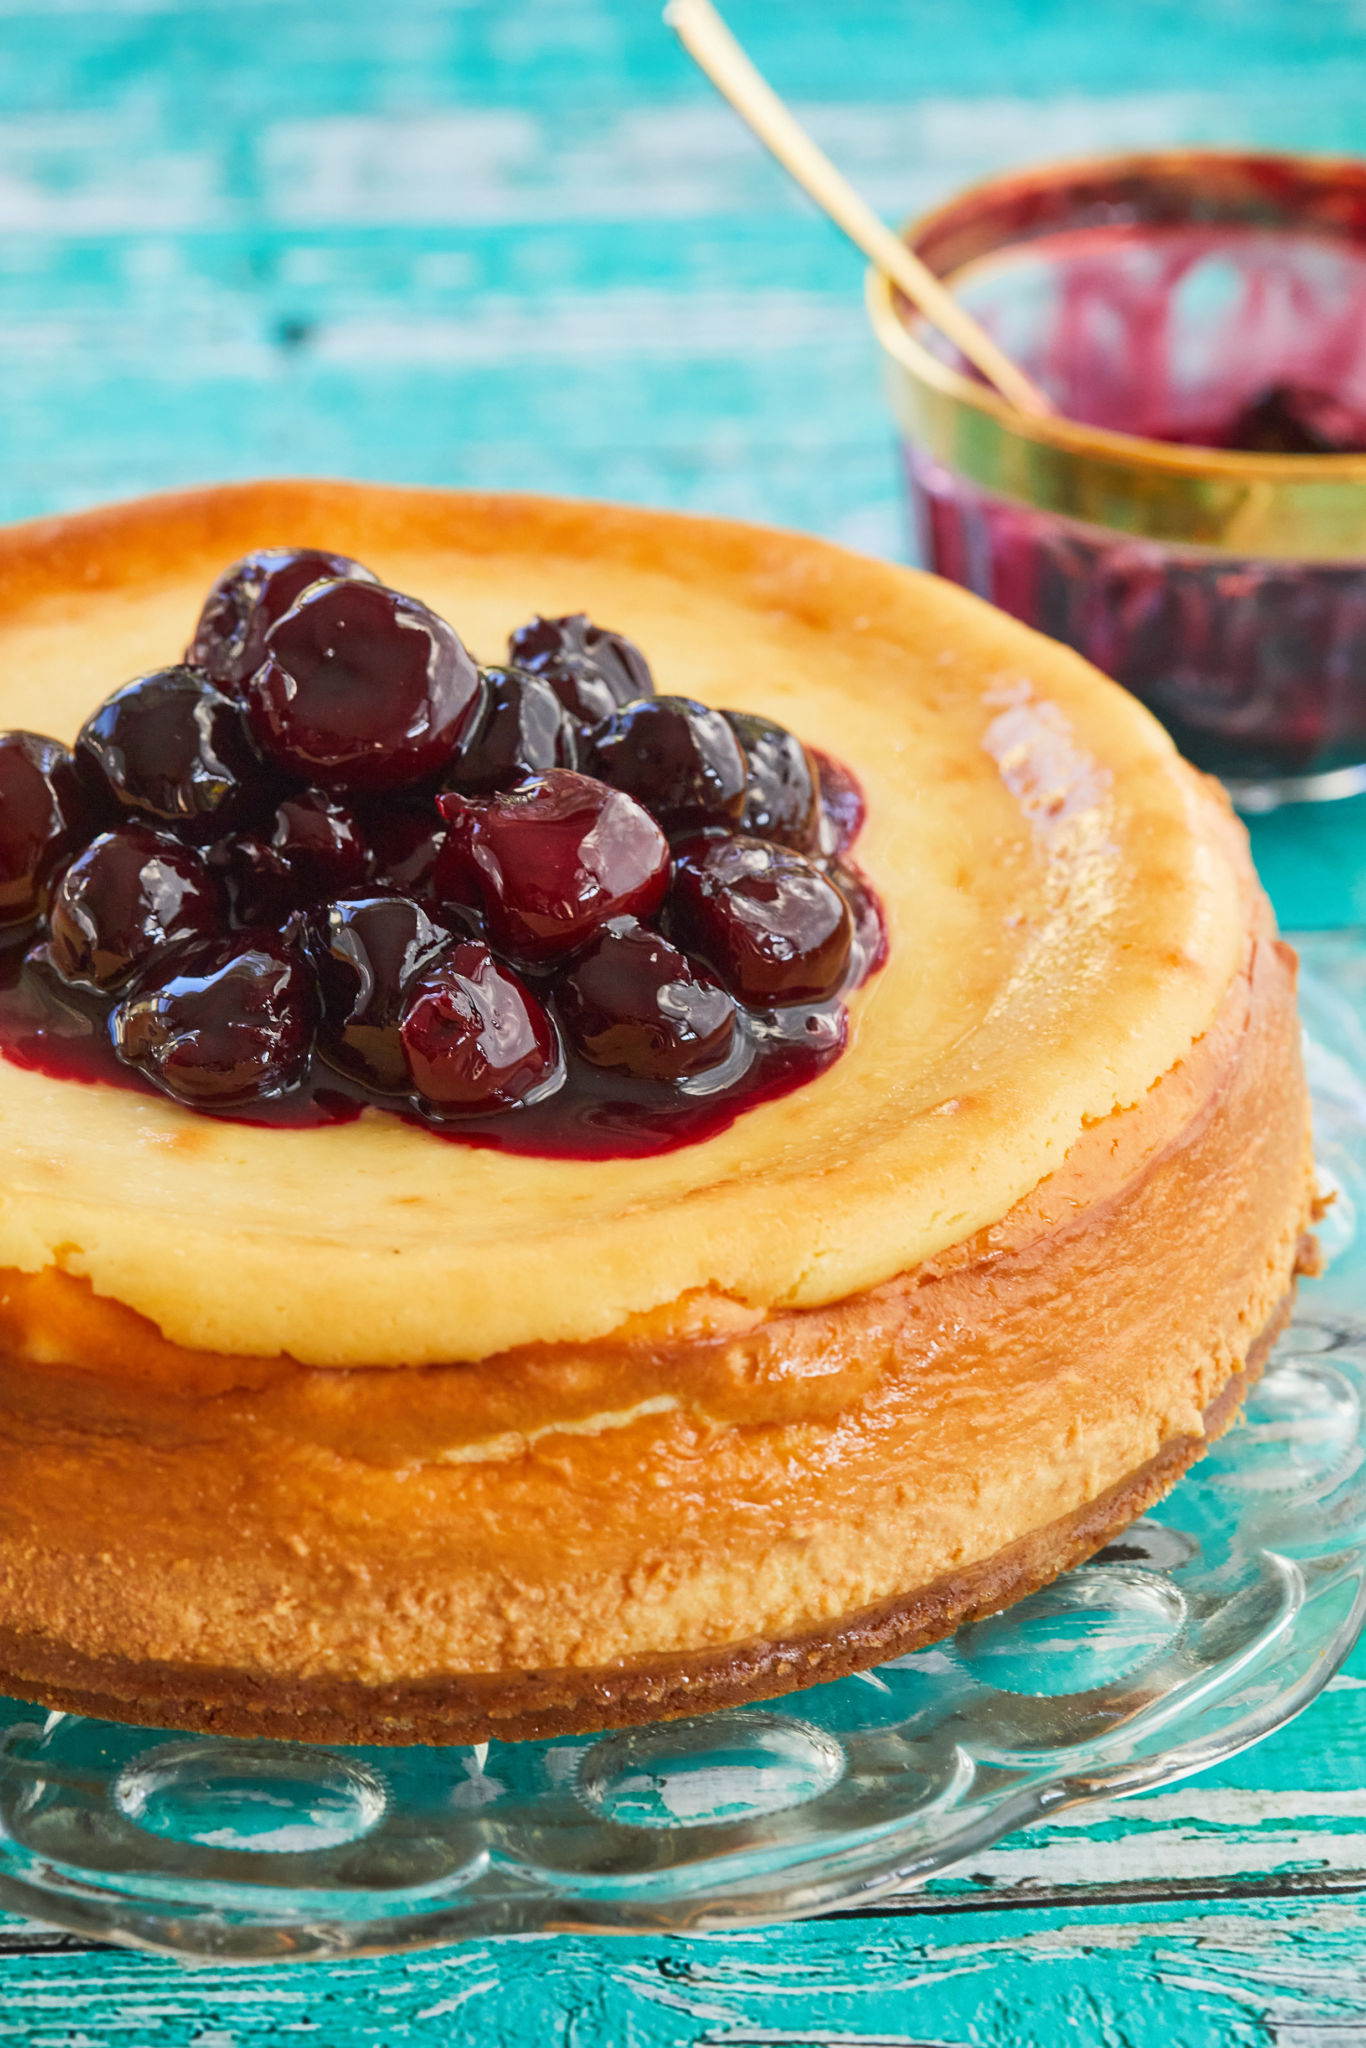 A New York cheesecake on the glass plate is perfectly baked golden, creamy, dense and sweet. It's topped with a big dollop of Candied Cherries (Glacé Cherries). A small glass bowl of Candied Cherries (Glacé Cherries) is on the side. 